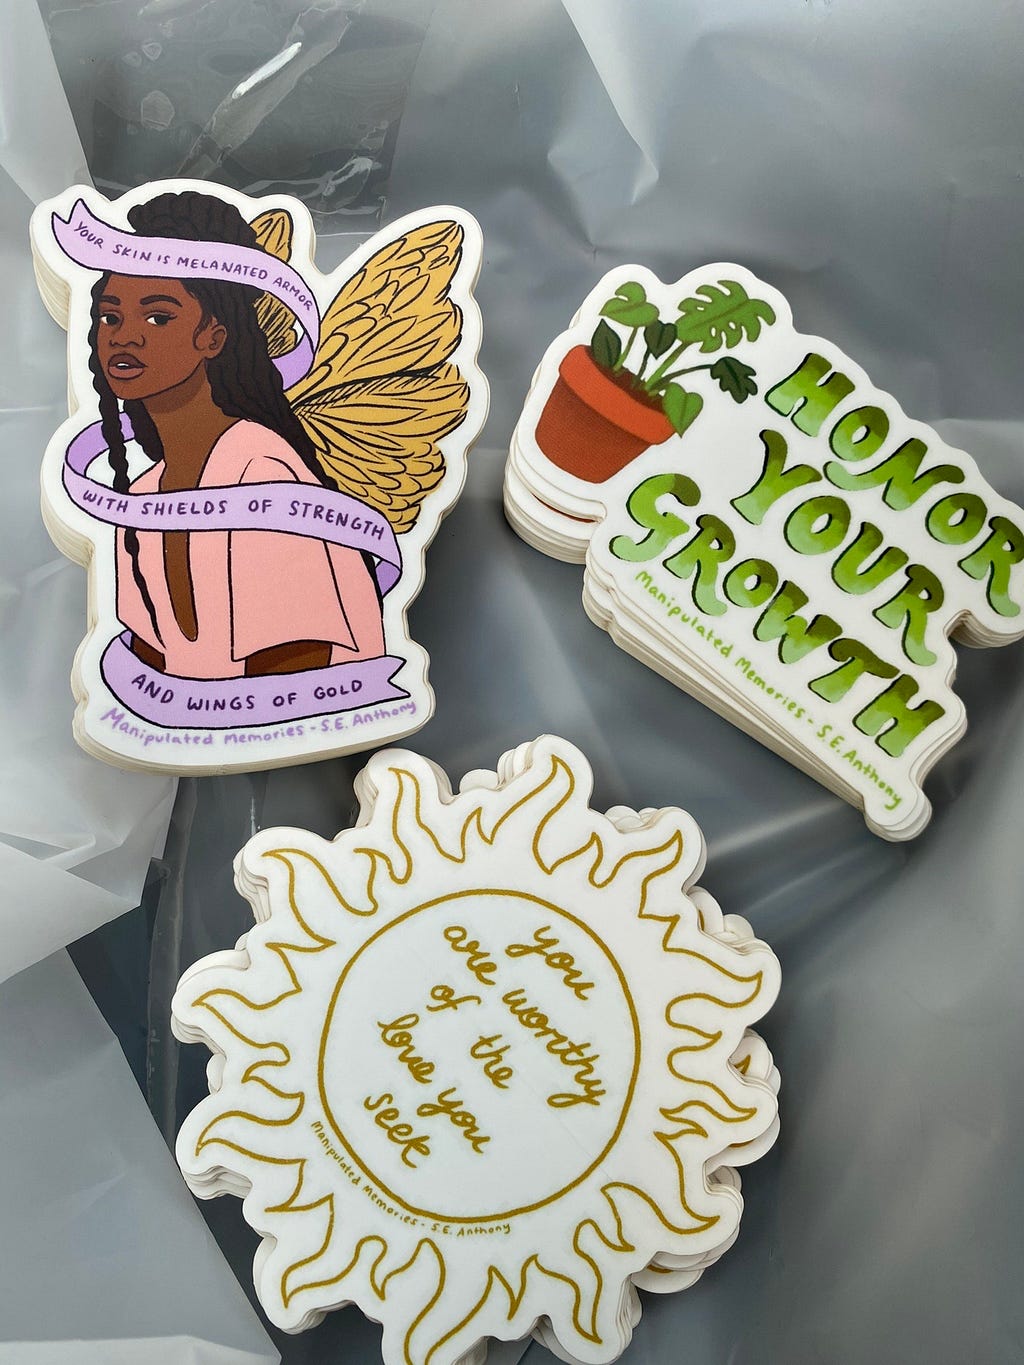 A group of different sticker designs. The designs feature a sun, a potted plant, and a young woman with wings.